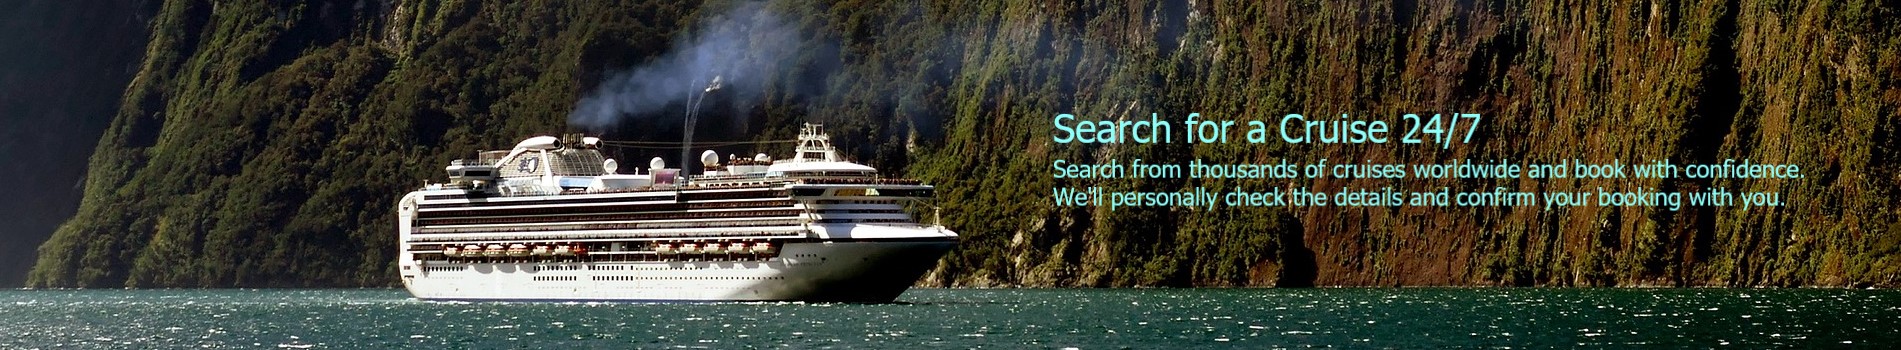 Search for a Cruise